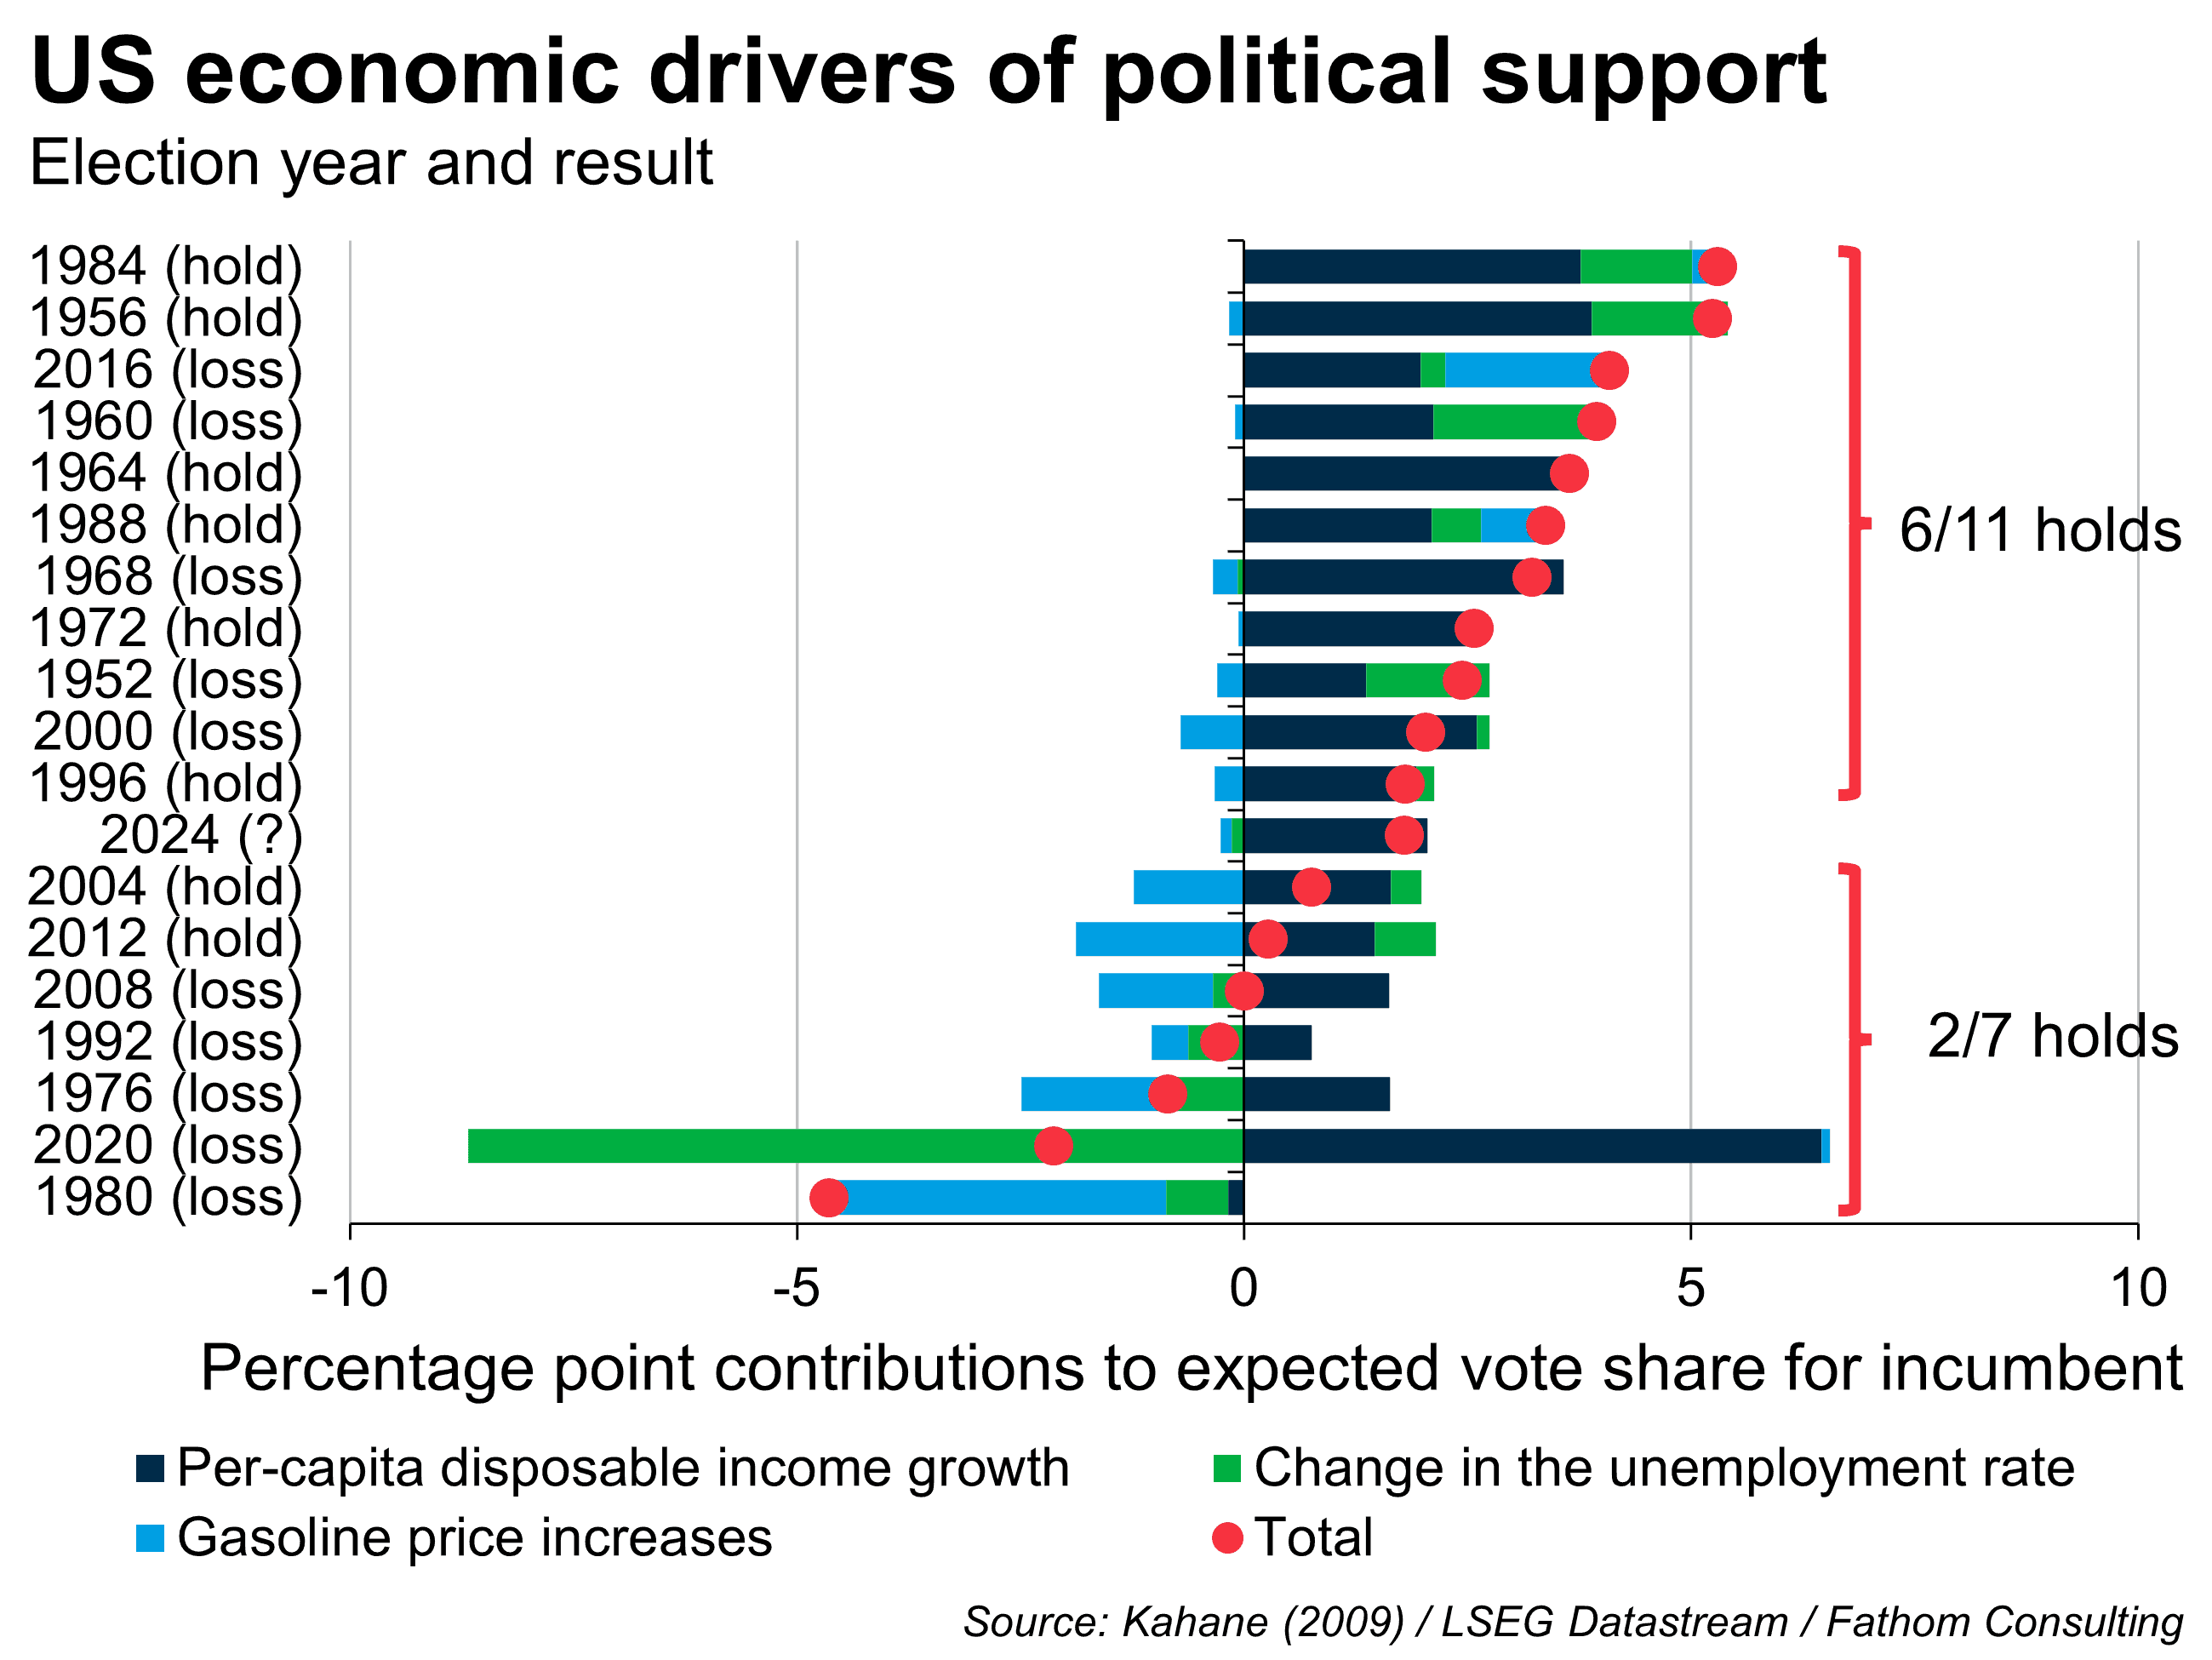 US economic drivers of political support, by election year and results, indicative by per capital disposable income, Gasoline prices, changes in employment, as percentage point contribution to expected vote share for incumbent